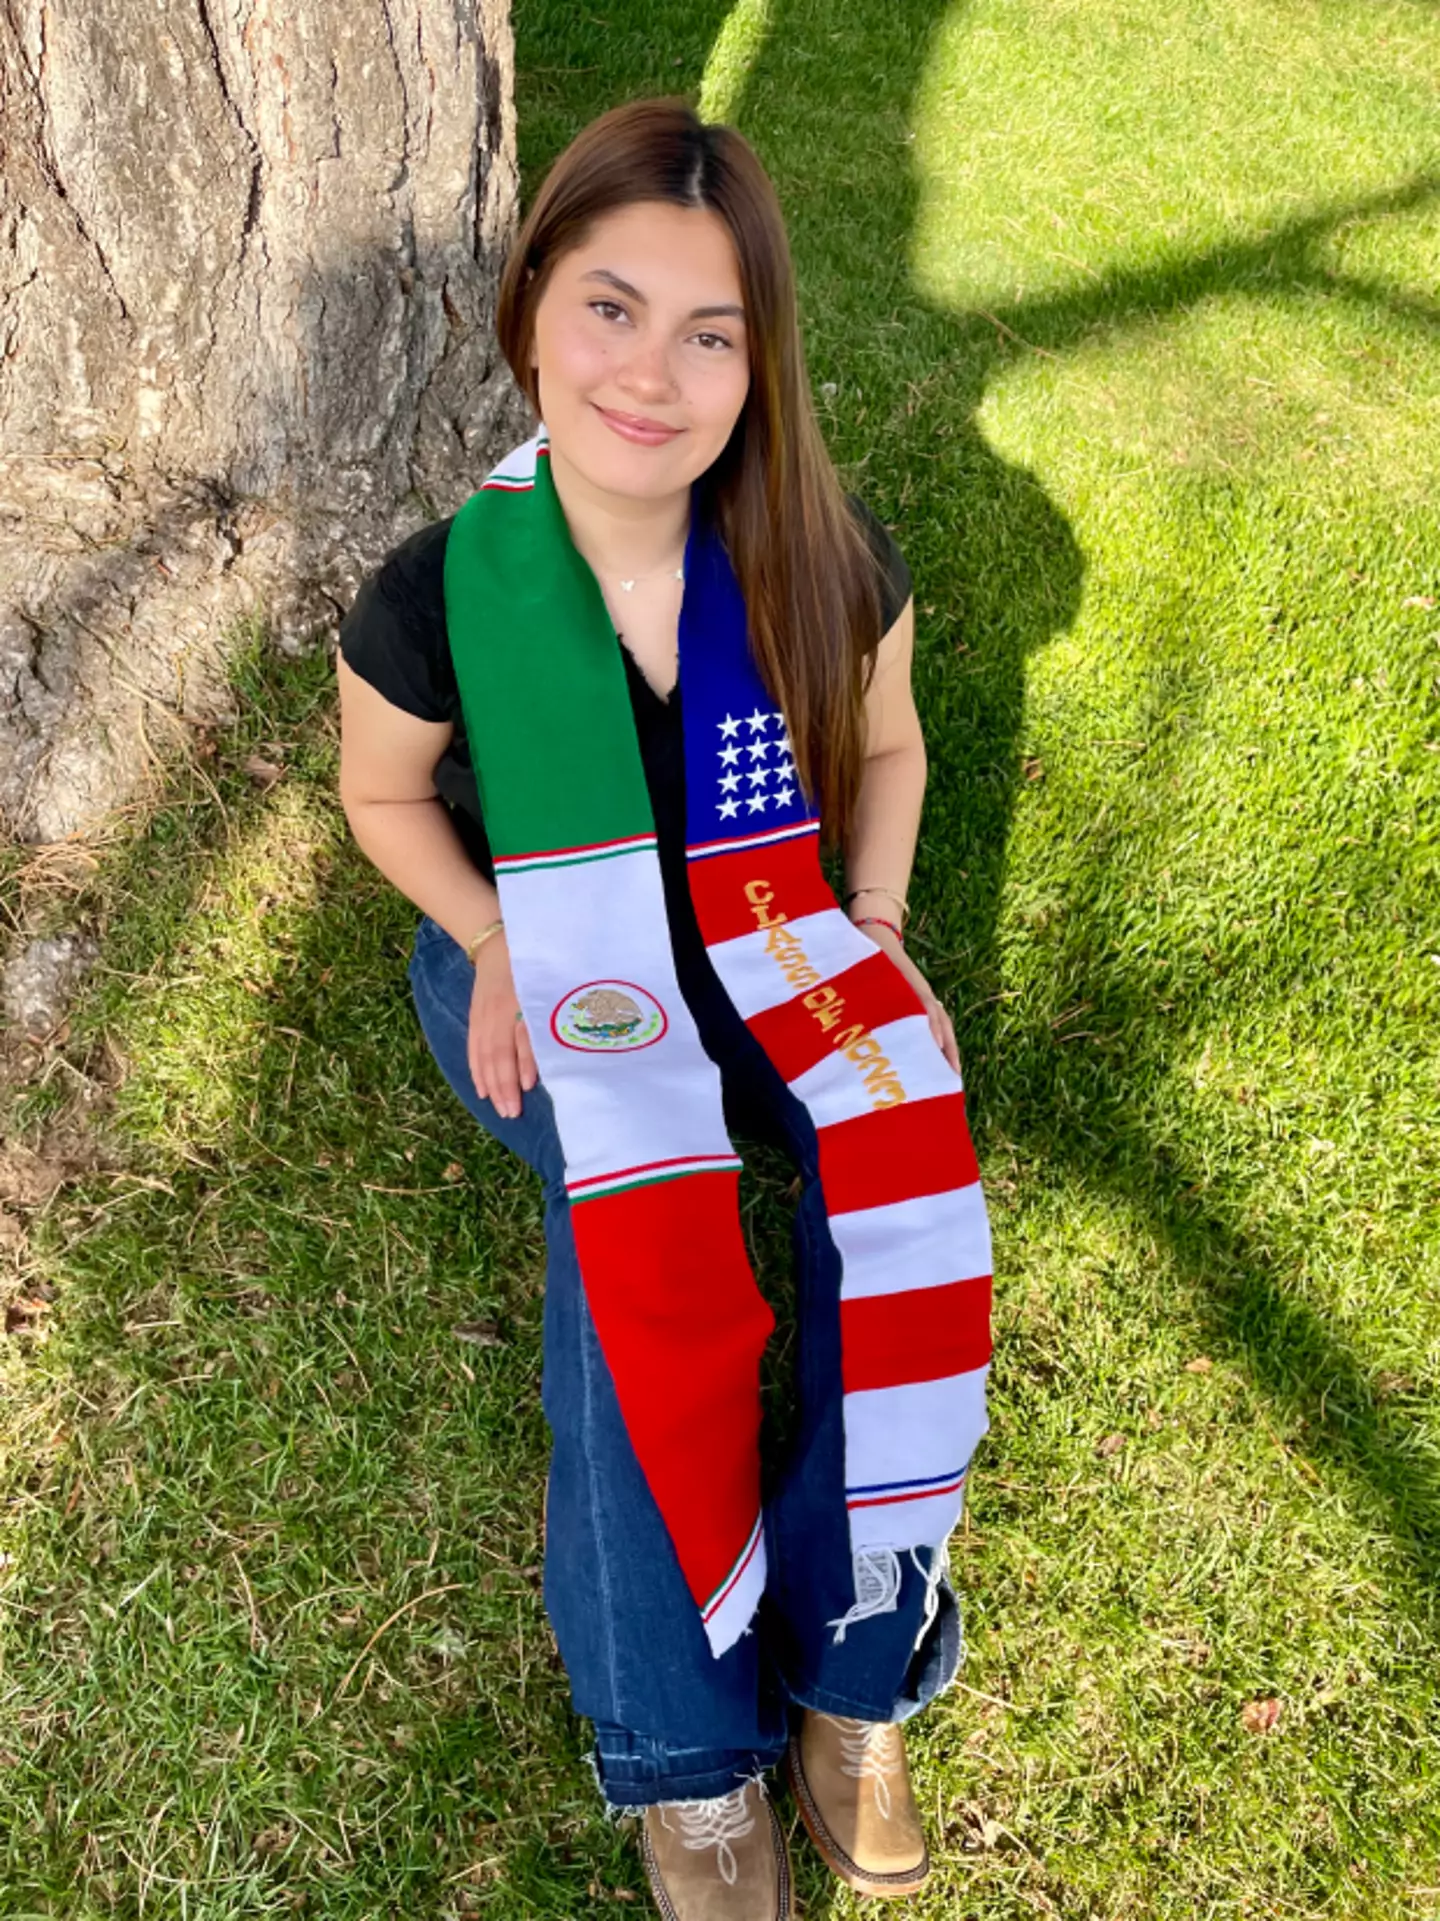 Naomi Peña Villasano was told she couldn't wear a sash with the US and Mexican flag.